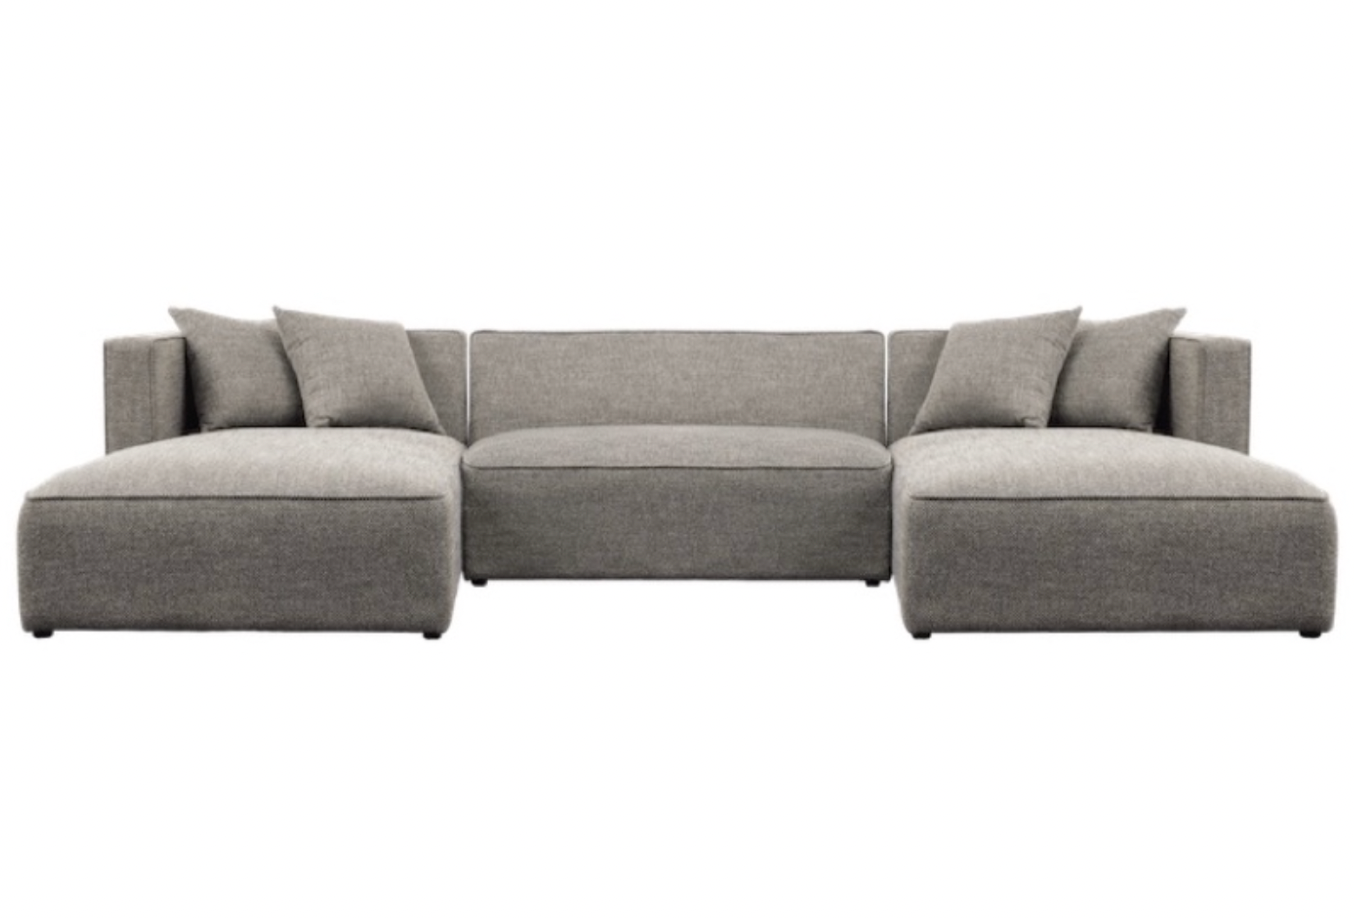 The Hatfield Sectional